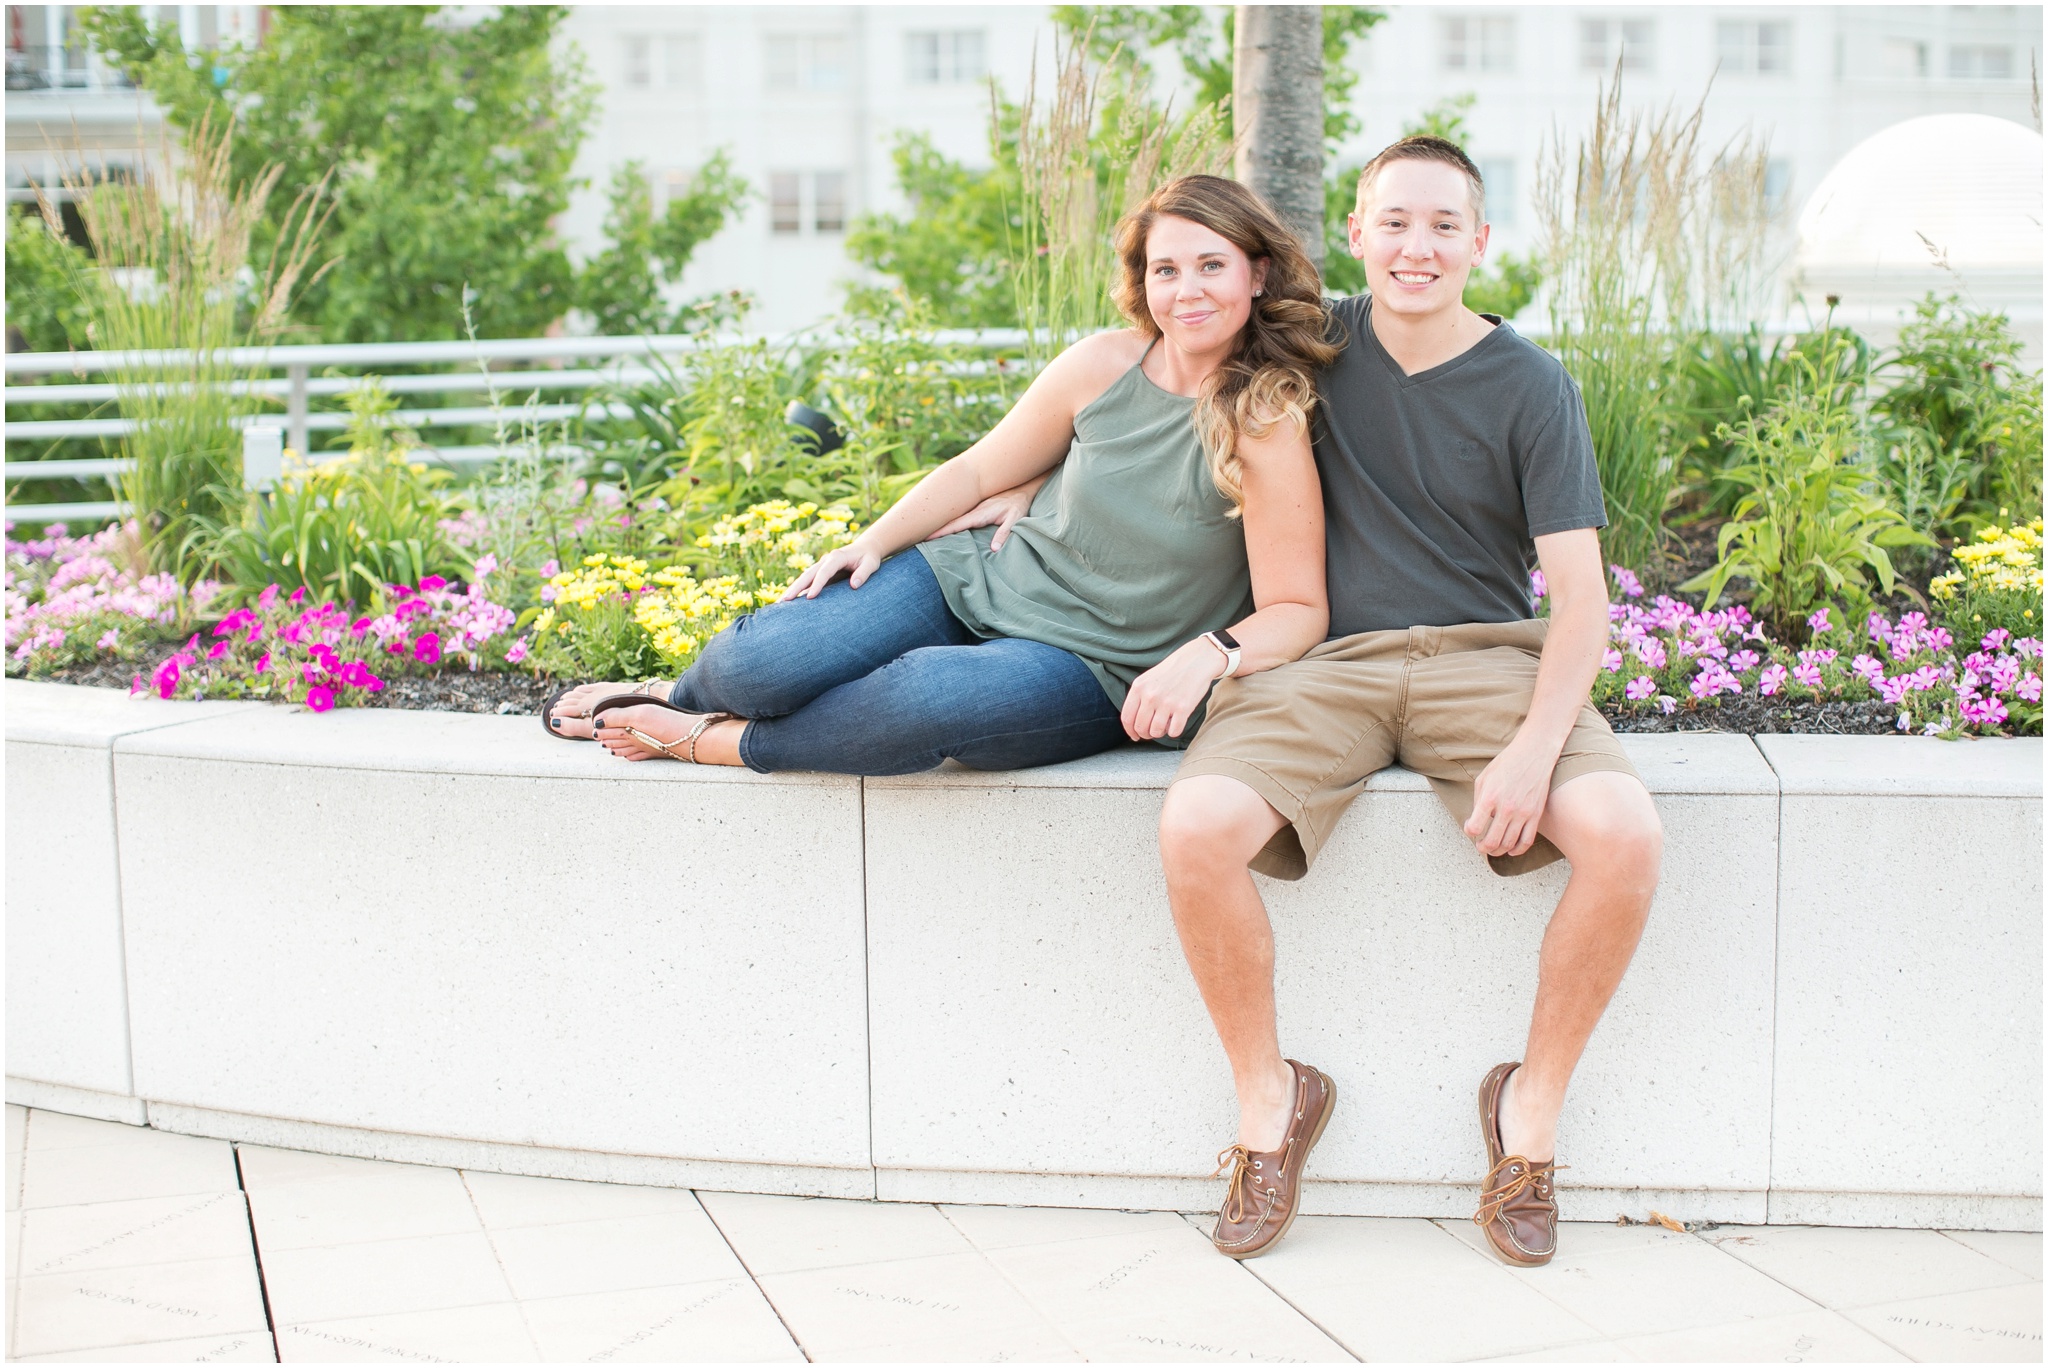 Downtown_Madison_Wisconsin_Engagement_Session_Waterfront_Monona_Terrace_0480.jpg